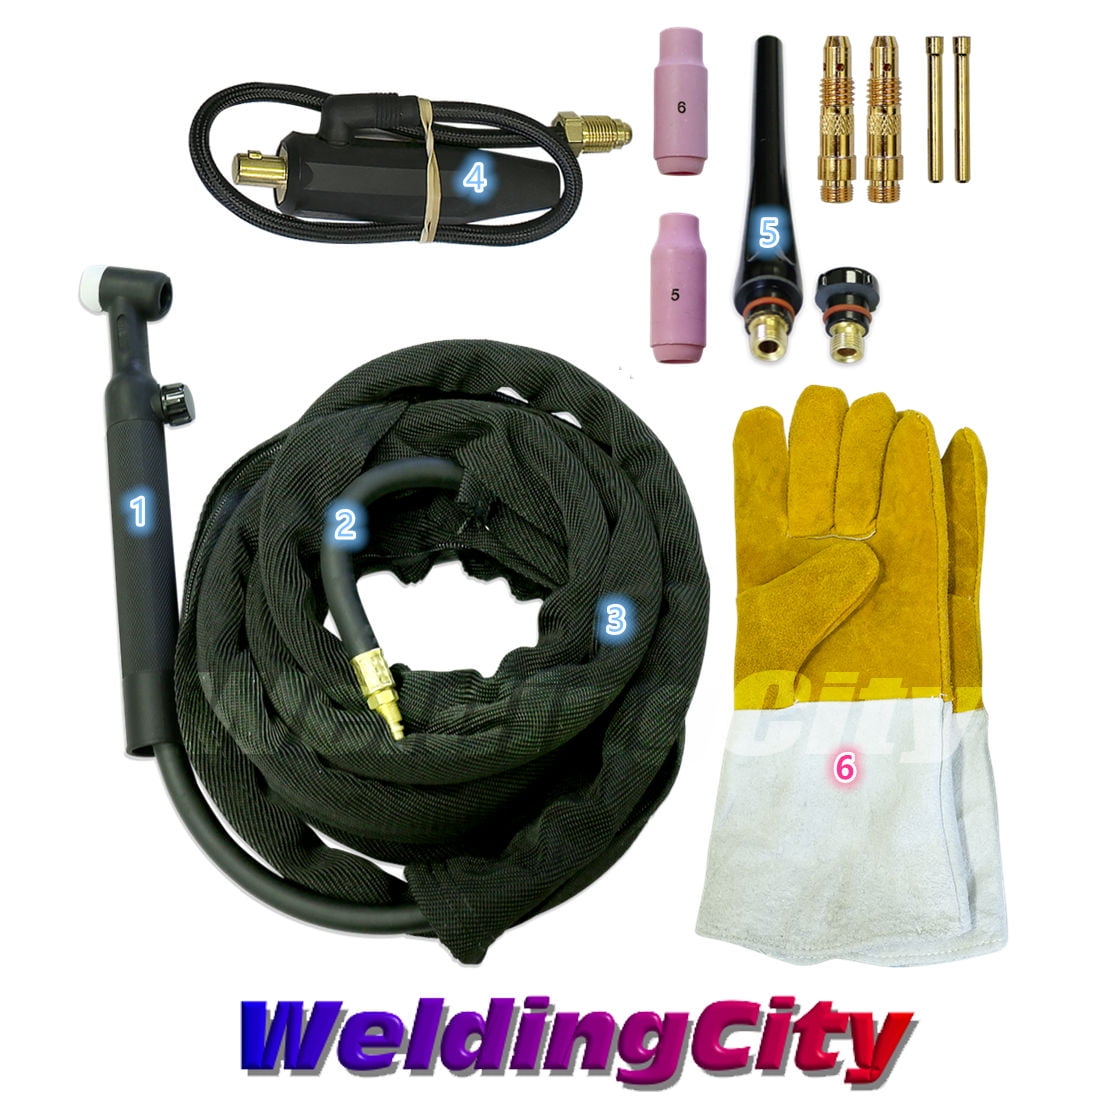 WP-17FV Air-Cooled TIG Welding Torch Flexible Gas Valve Head 150 Amp 25FT